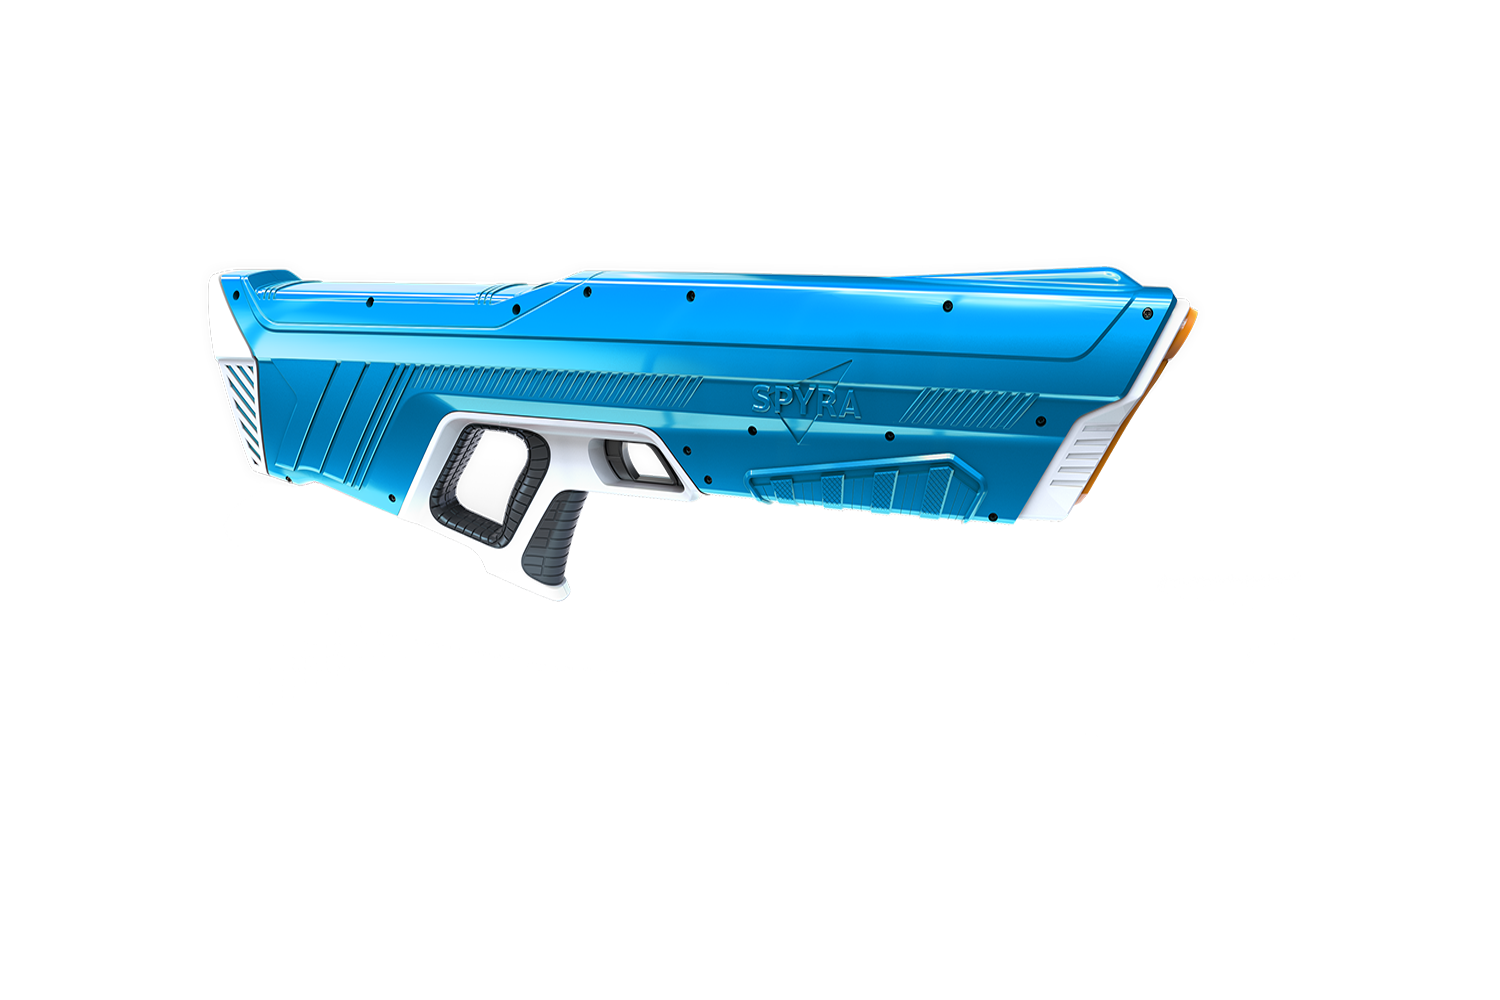 Spyra Two - Super Blaster Duel Pack - Two Electronic Water Guns - Red and  Blue